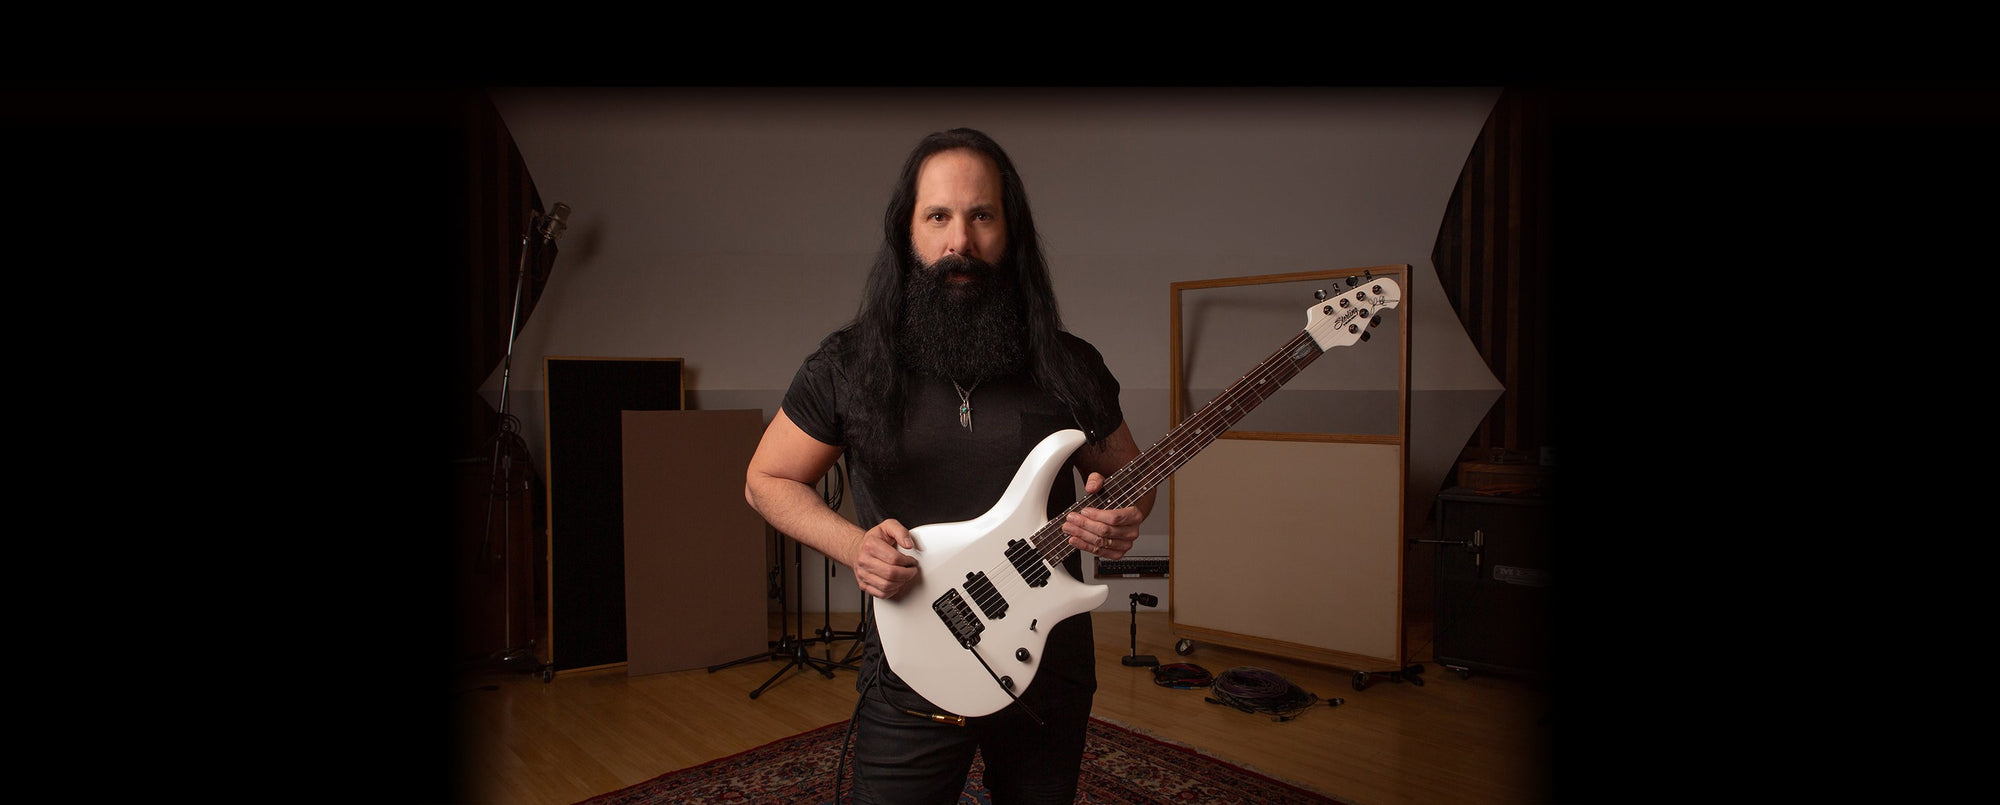 John Petrucci holding the Majesty 7 guitar in Pearl White.